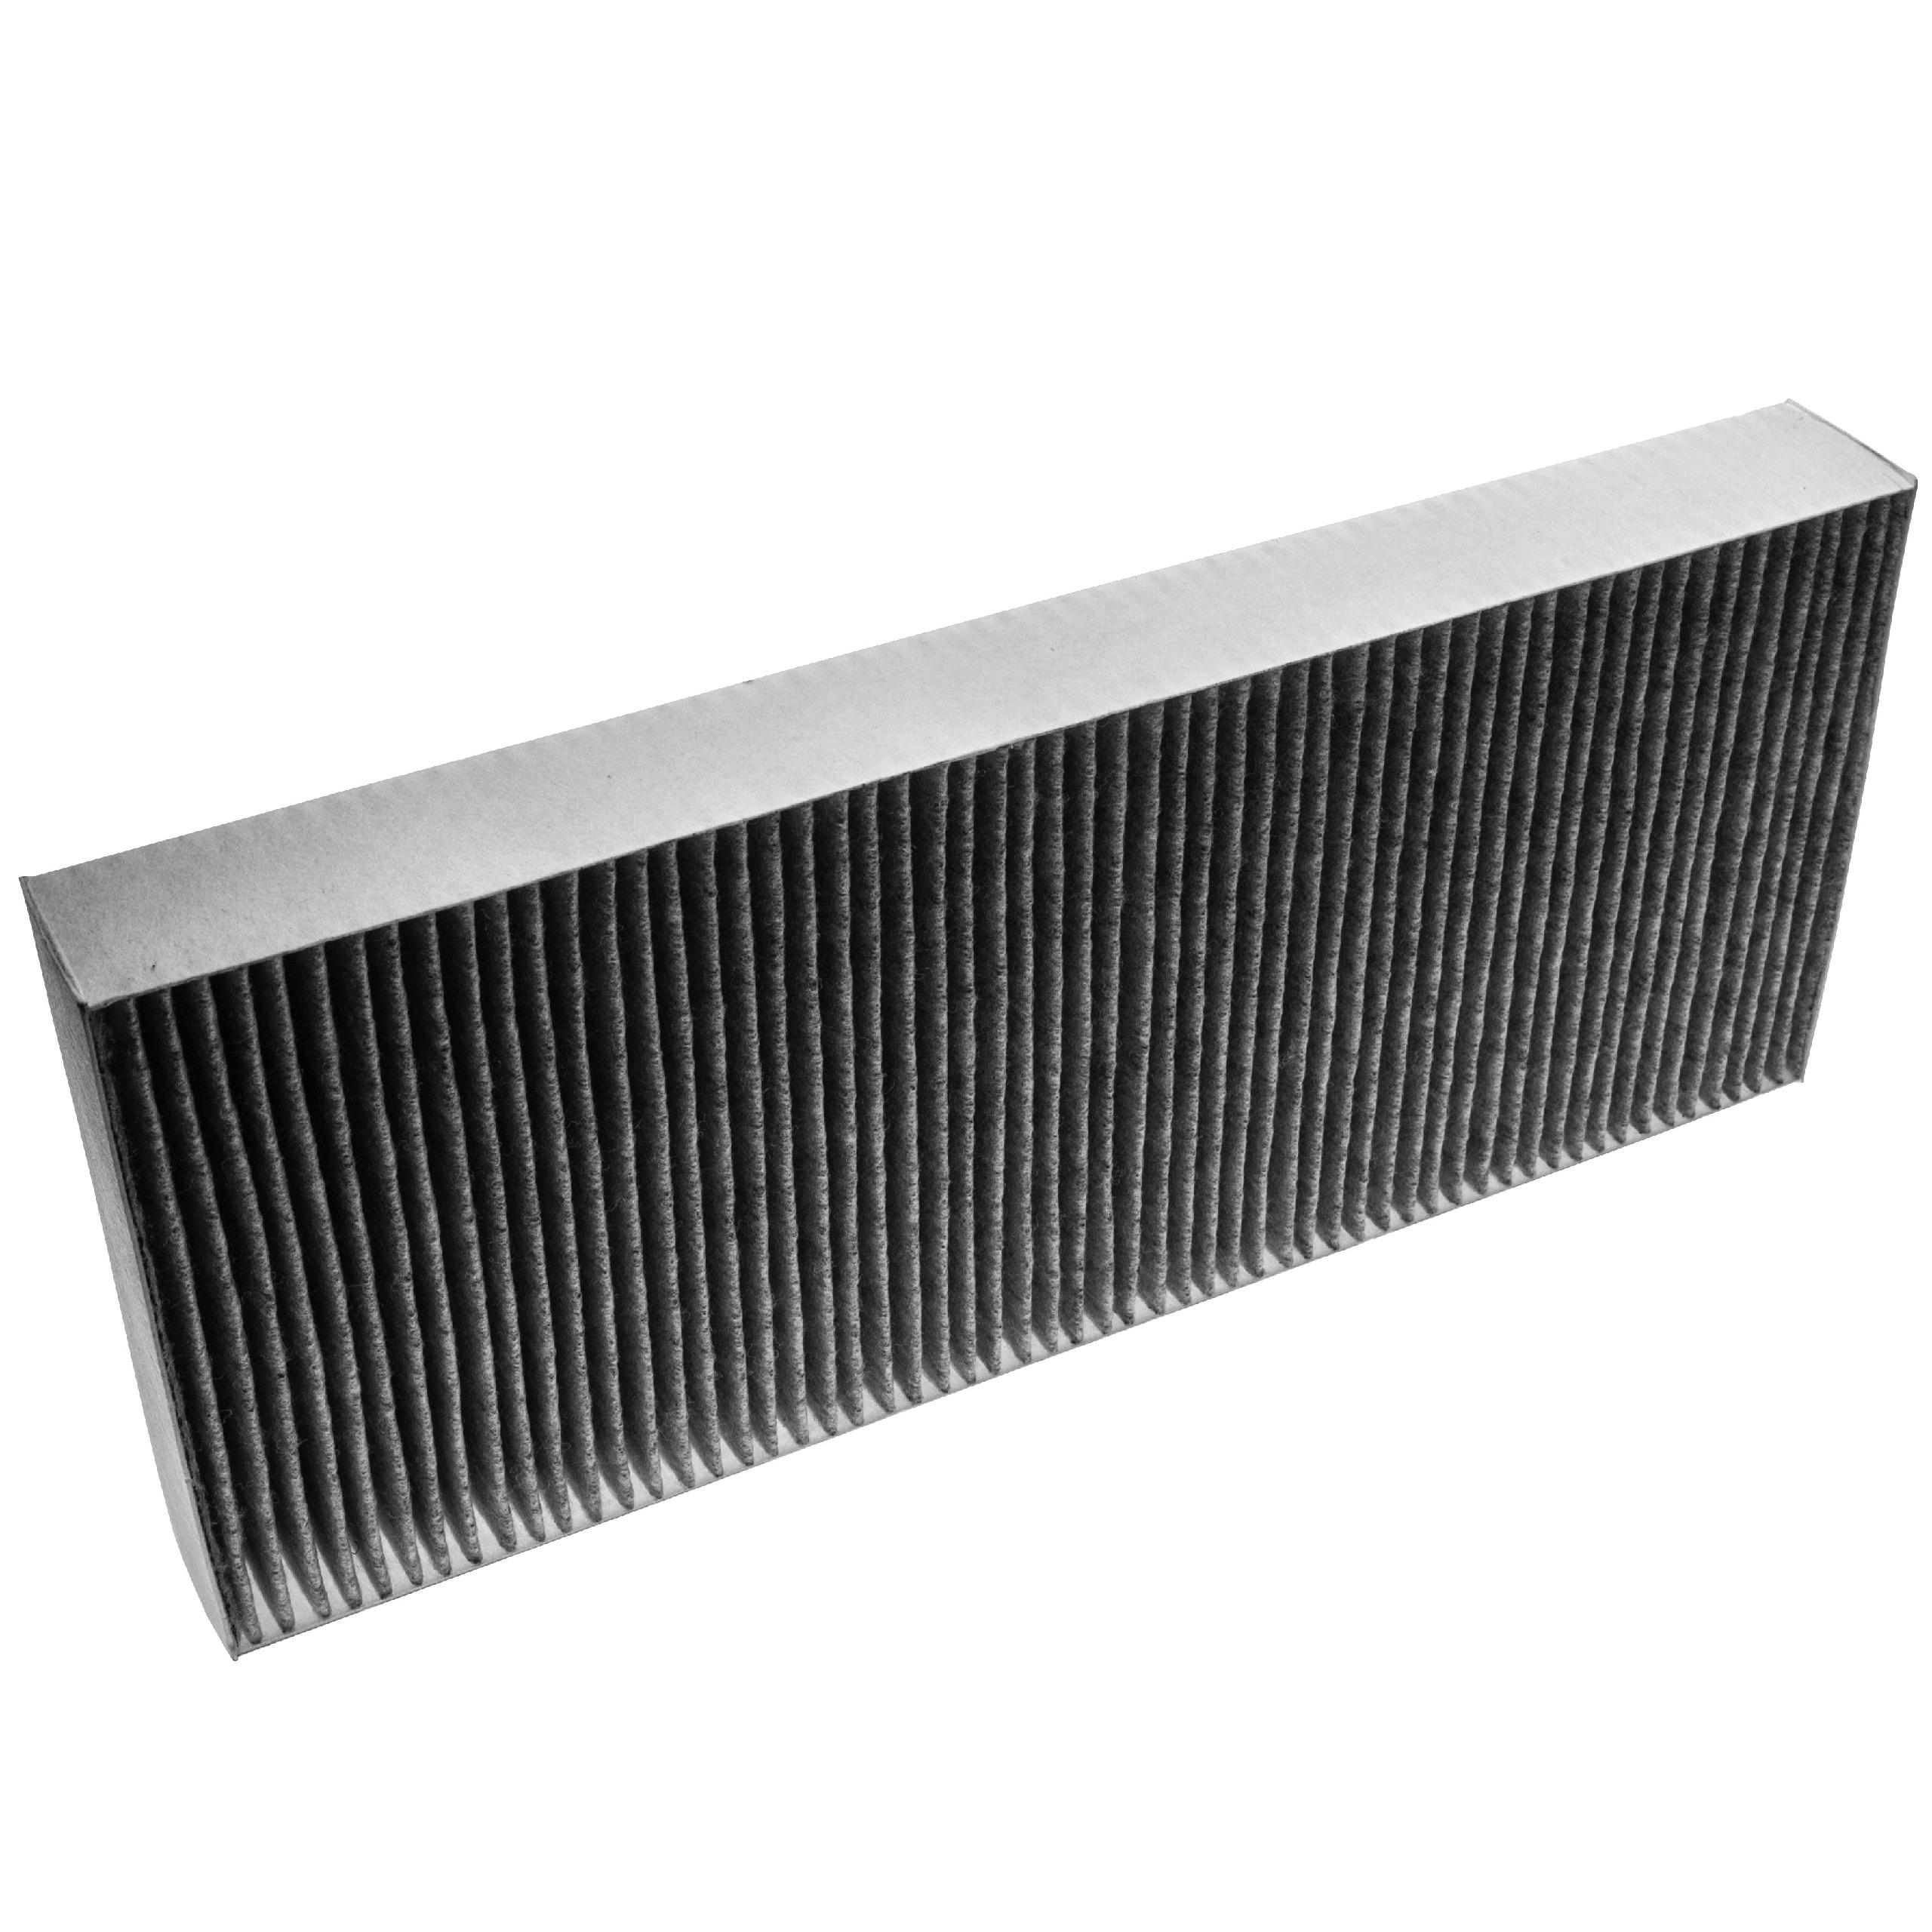 Activated Carbon Filter as Replacement for 11010506, 11018621 for Bosch Hob etc. - 46 x 19.1 x 5 cm